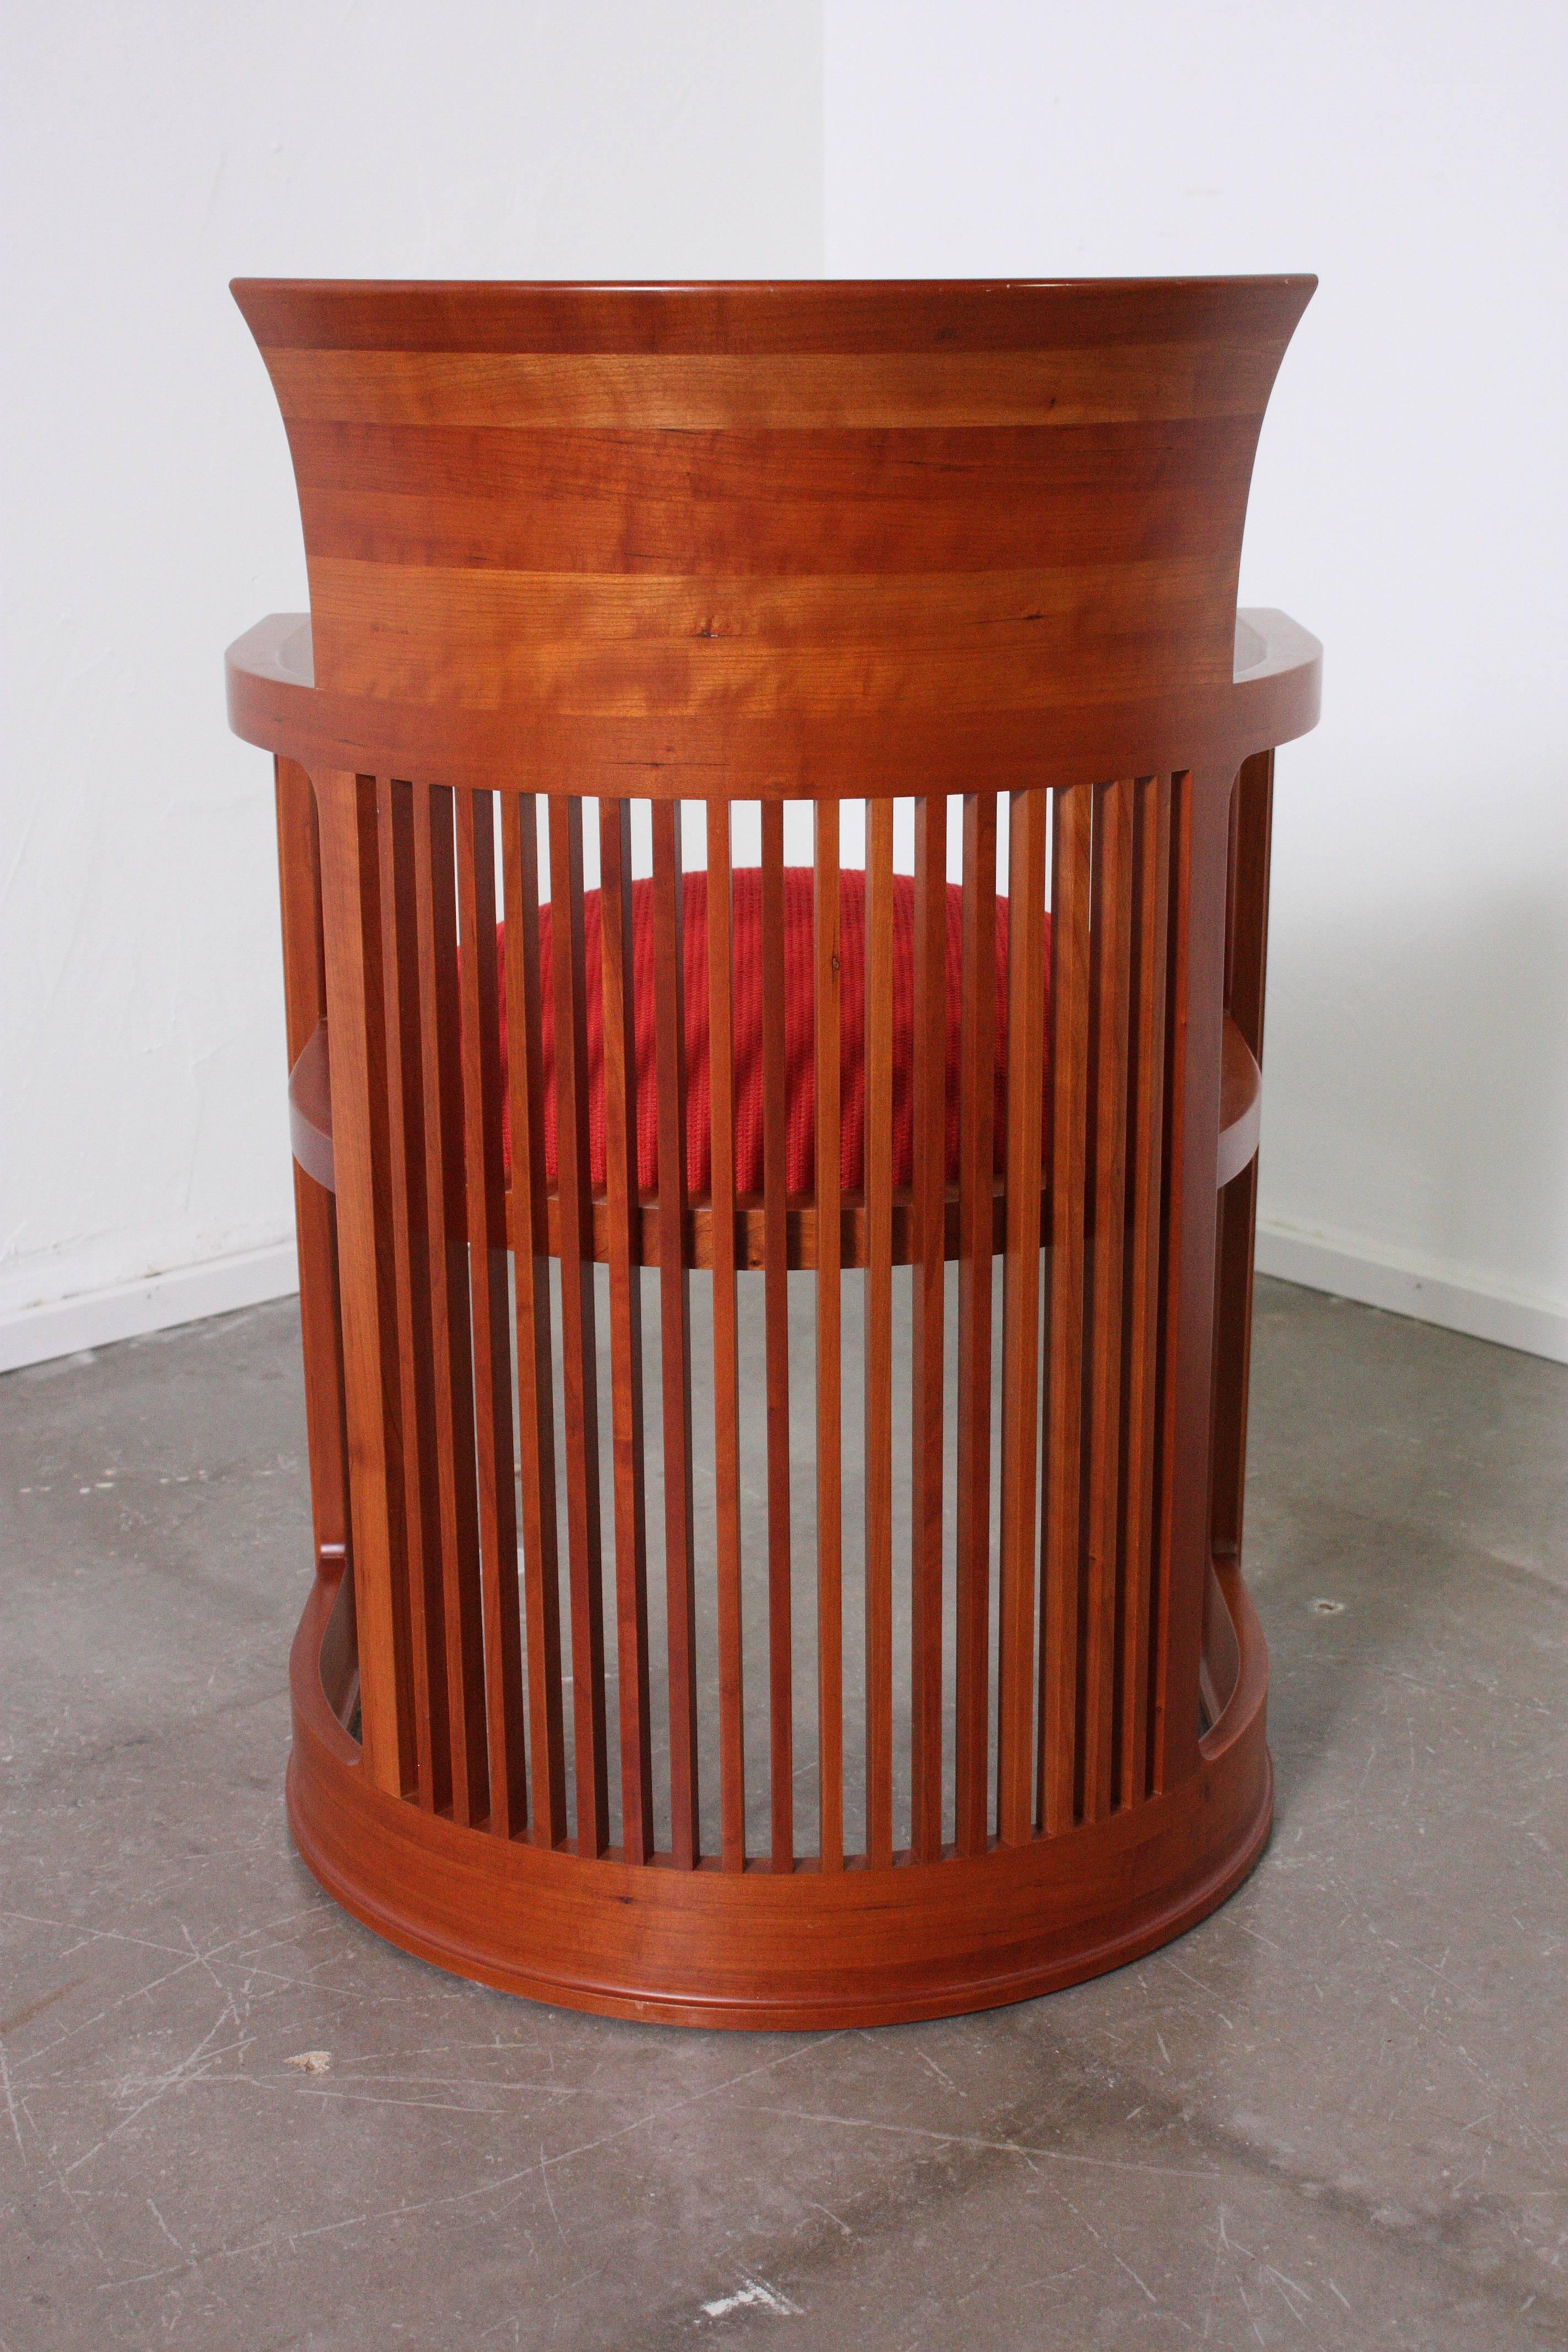 Singed and numbered Frank Lloyd Wright Barrel chair by Cassina. Produced in limited production.